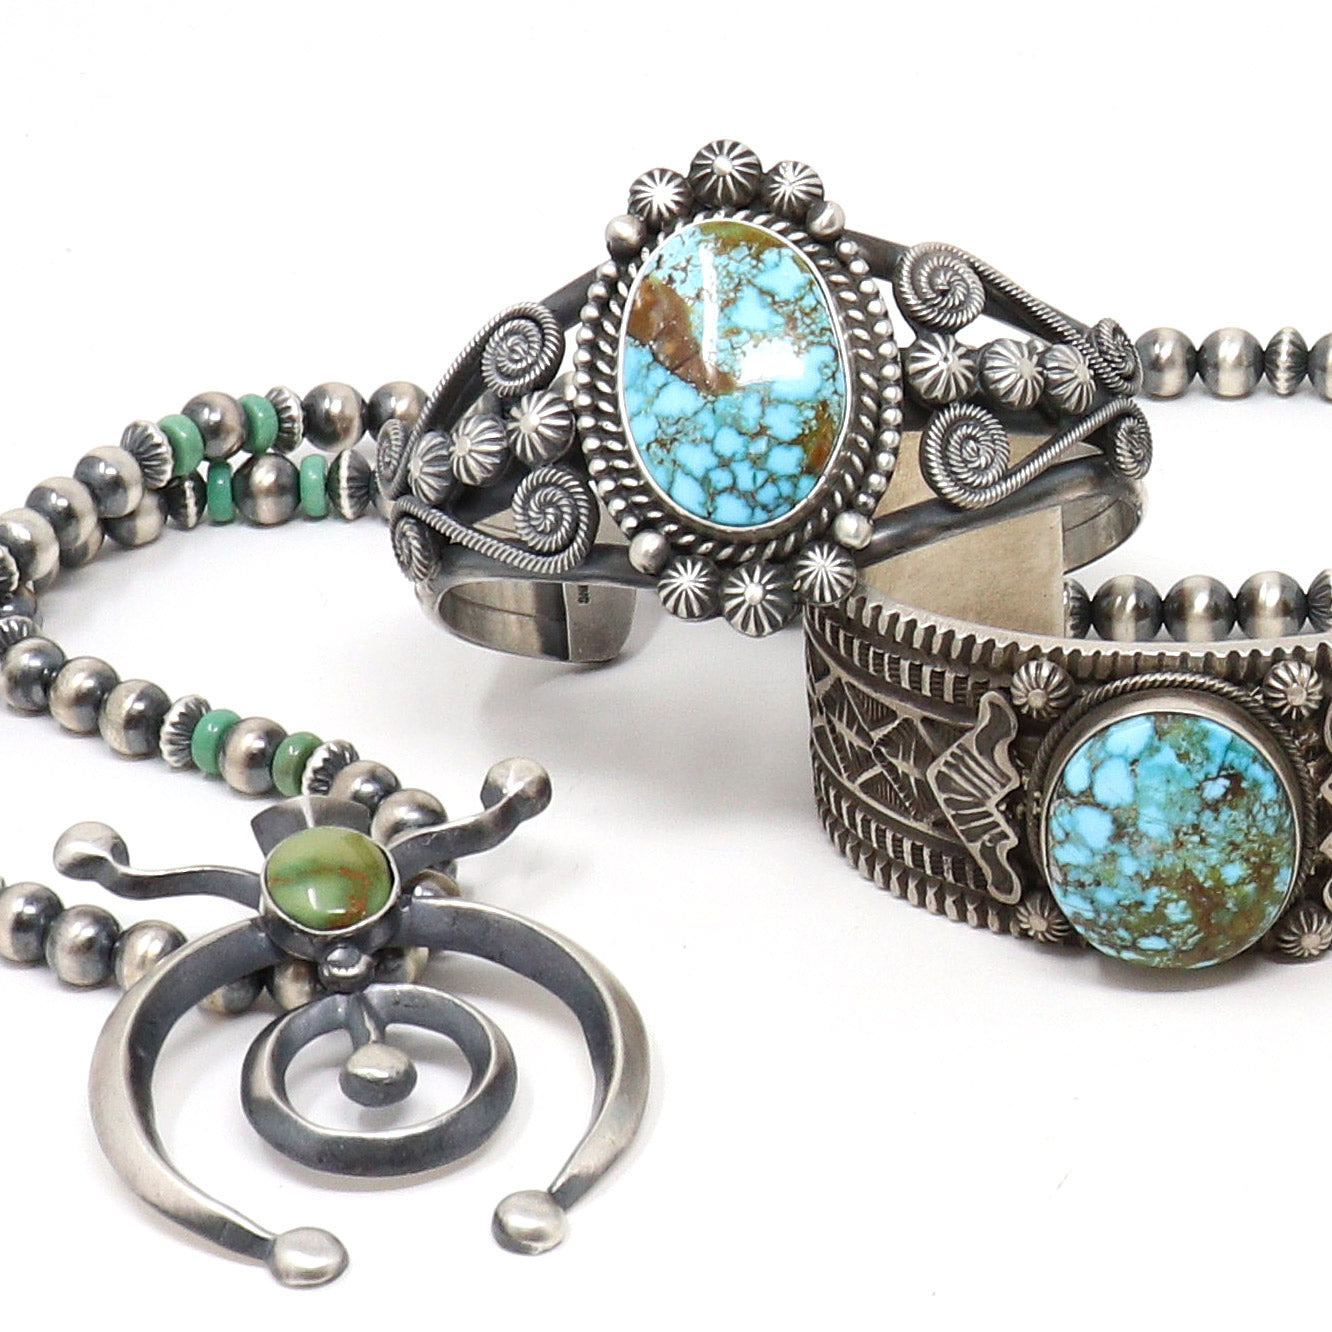 Large selection of Silver & Turquoise Jewelry